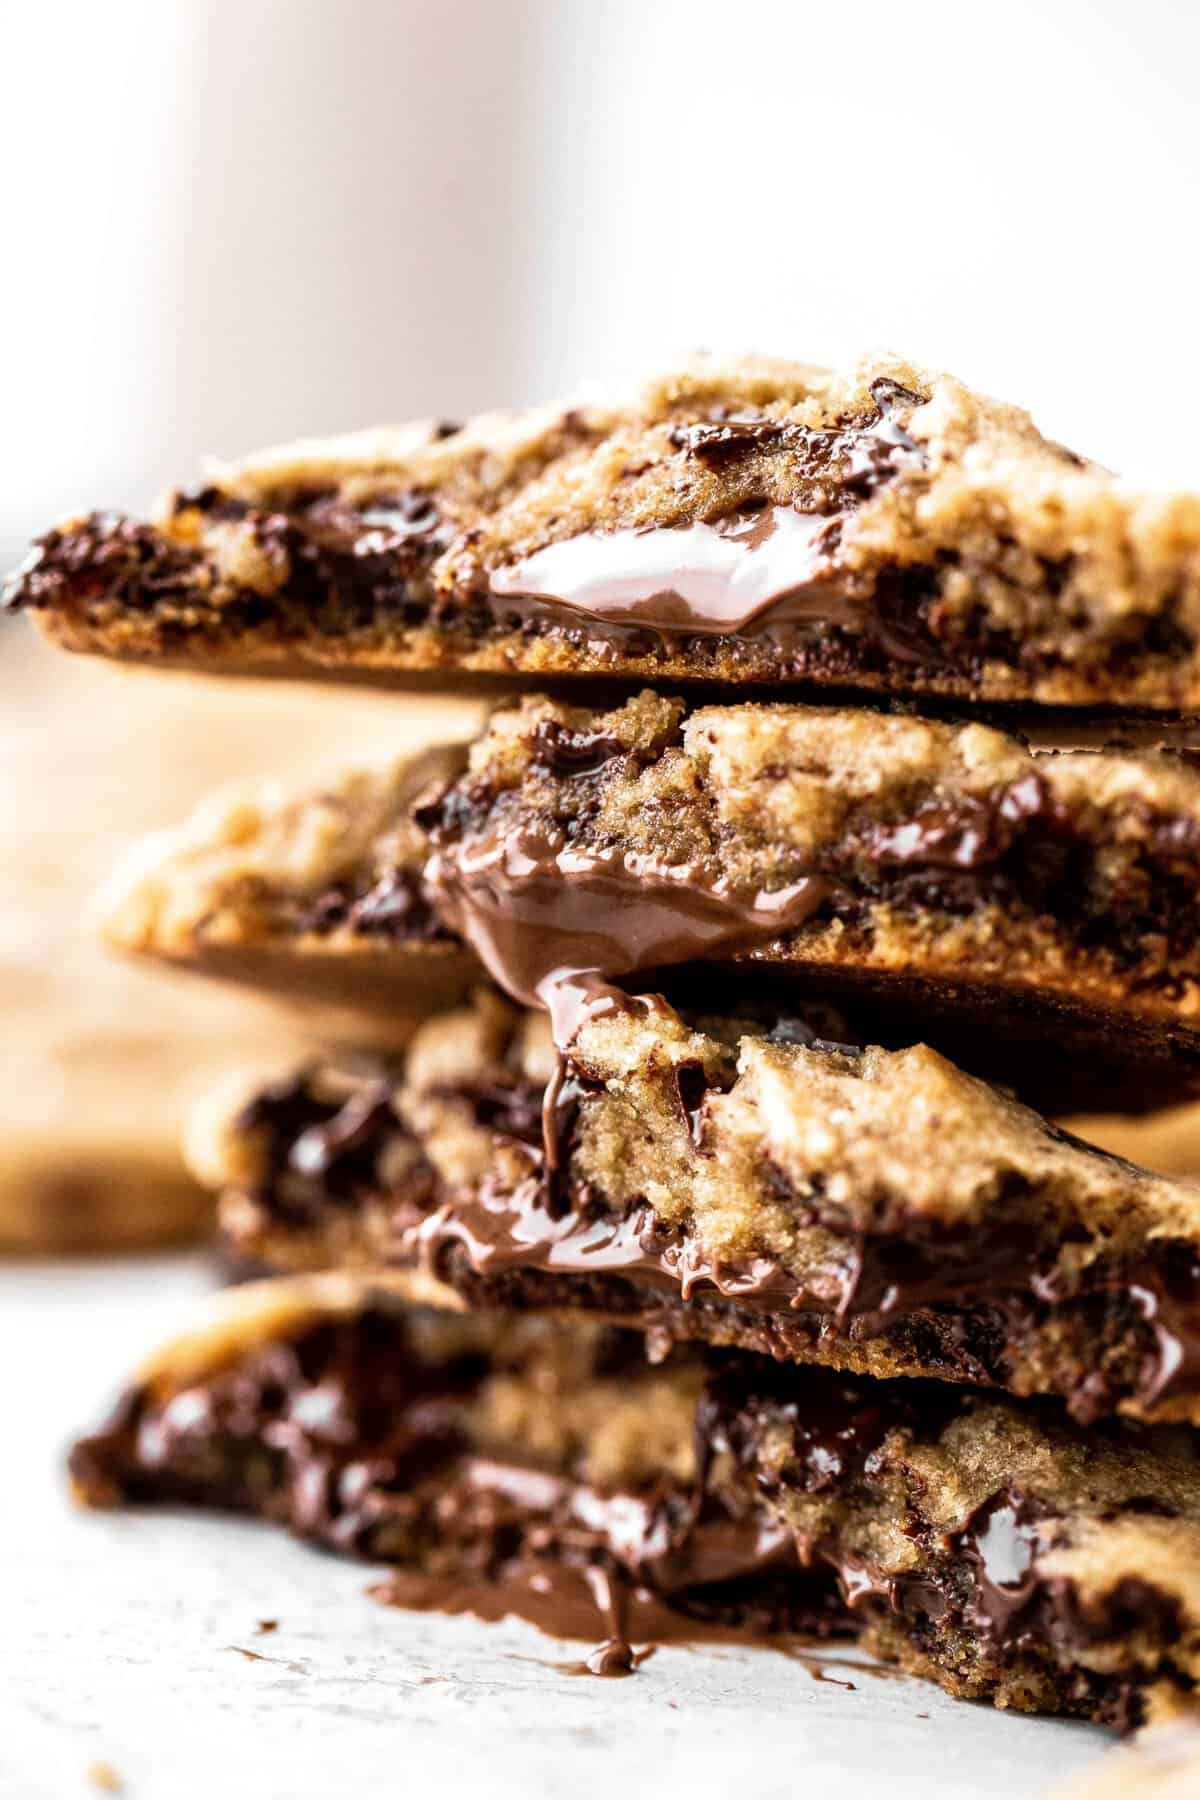 Nutella button cookies